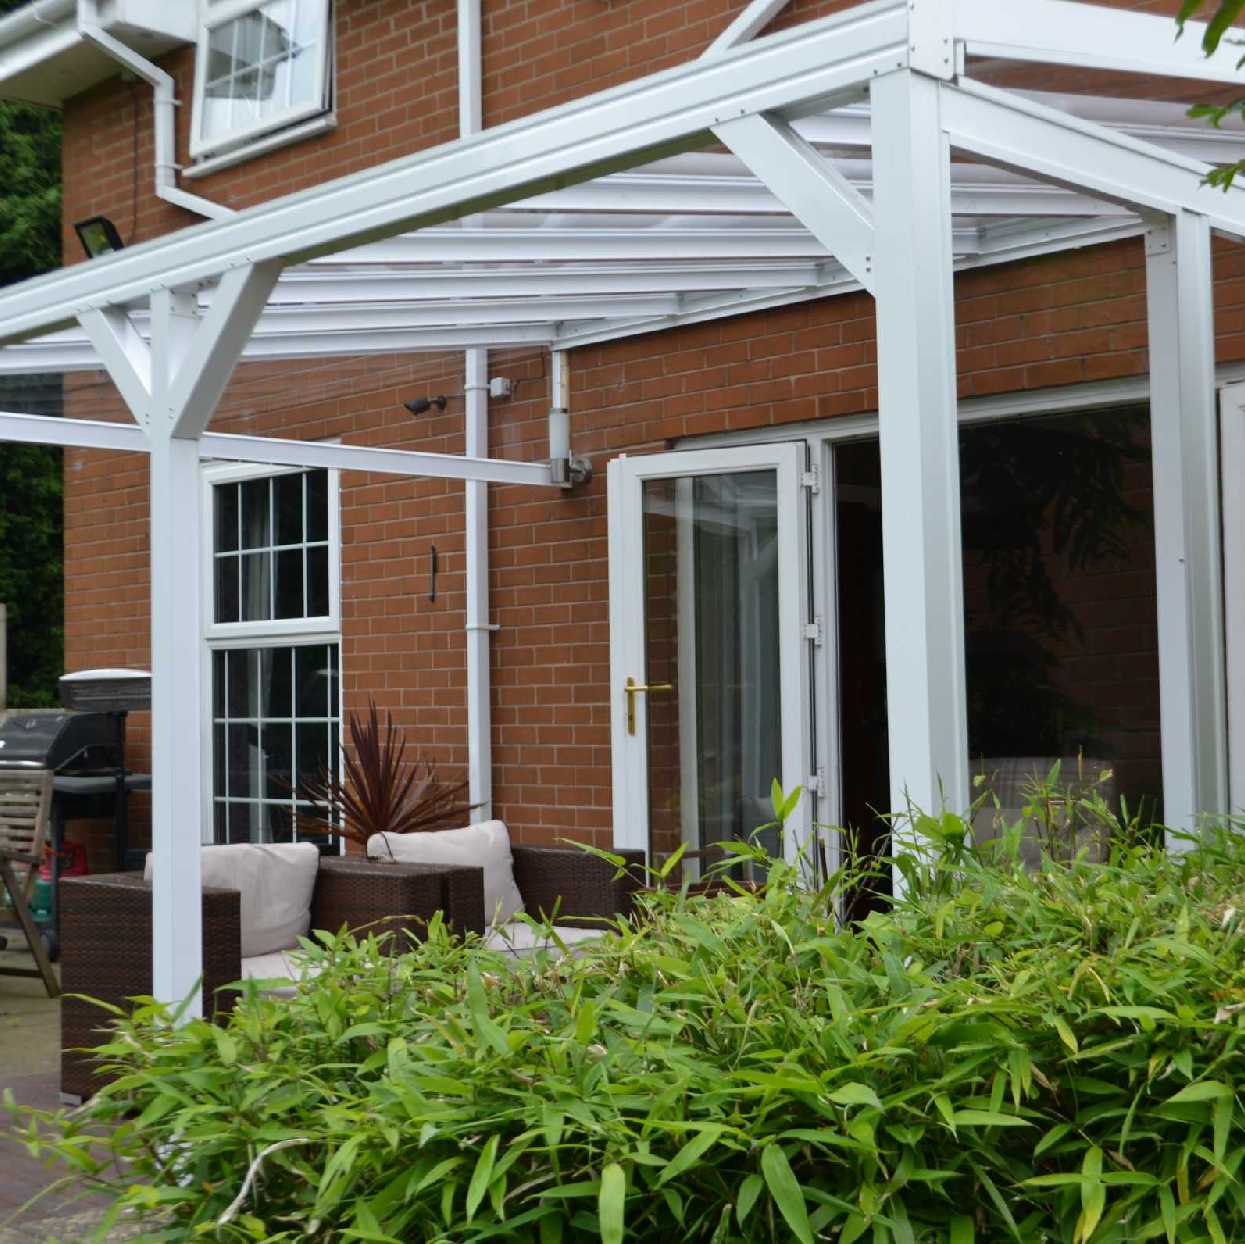 Omega Smart Lean-To Canopy, White UNGLAZED for 6mm Glazing - 9.8m (W) x 2.0m (P), (5) Supporting Posts from Omega Build